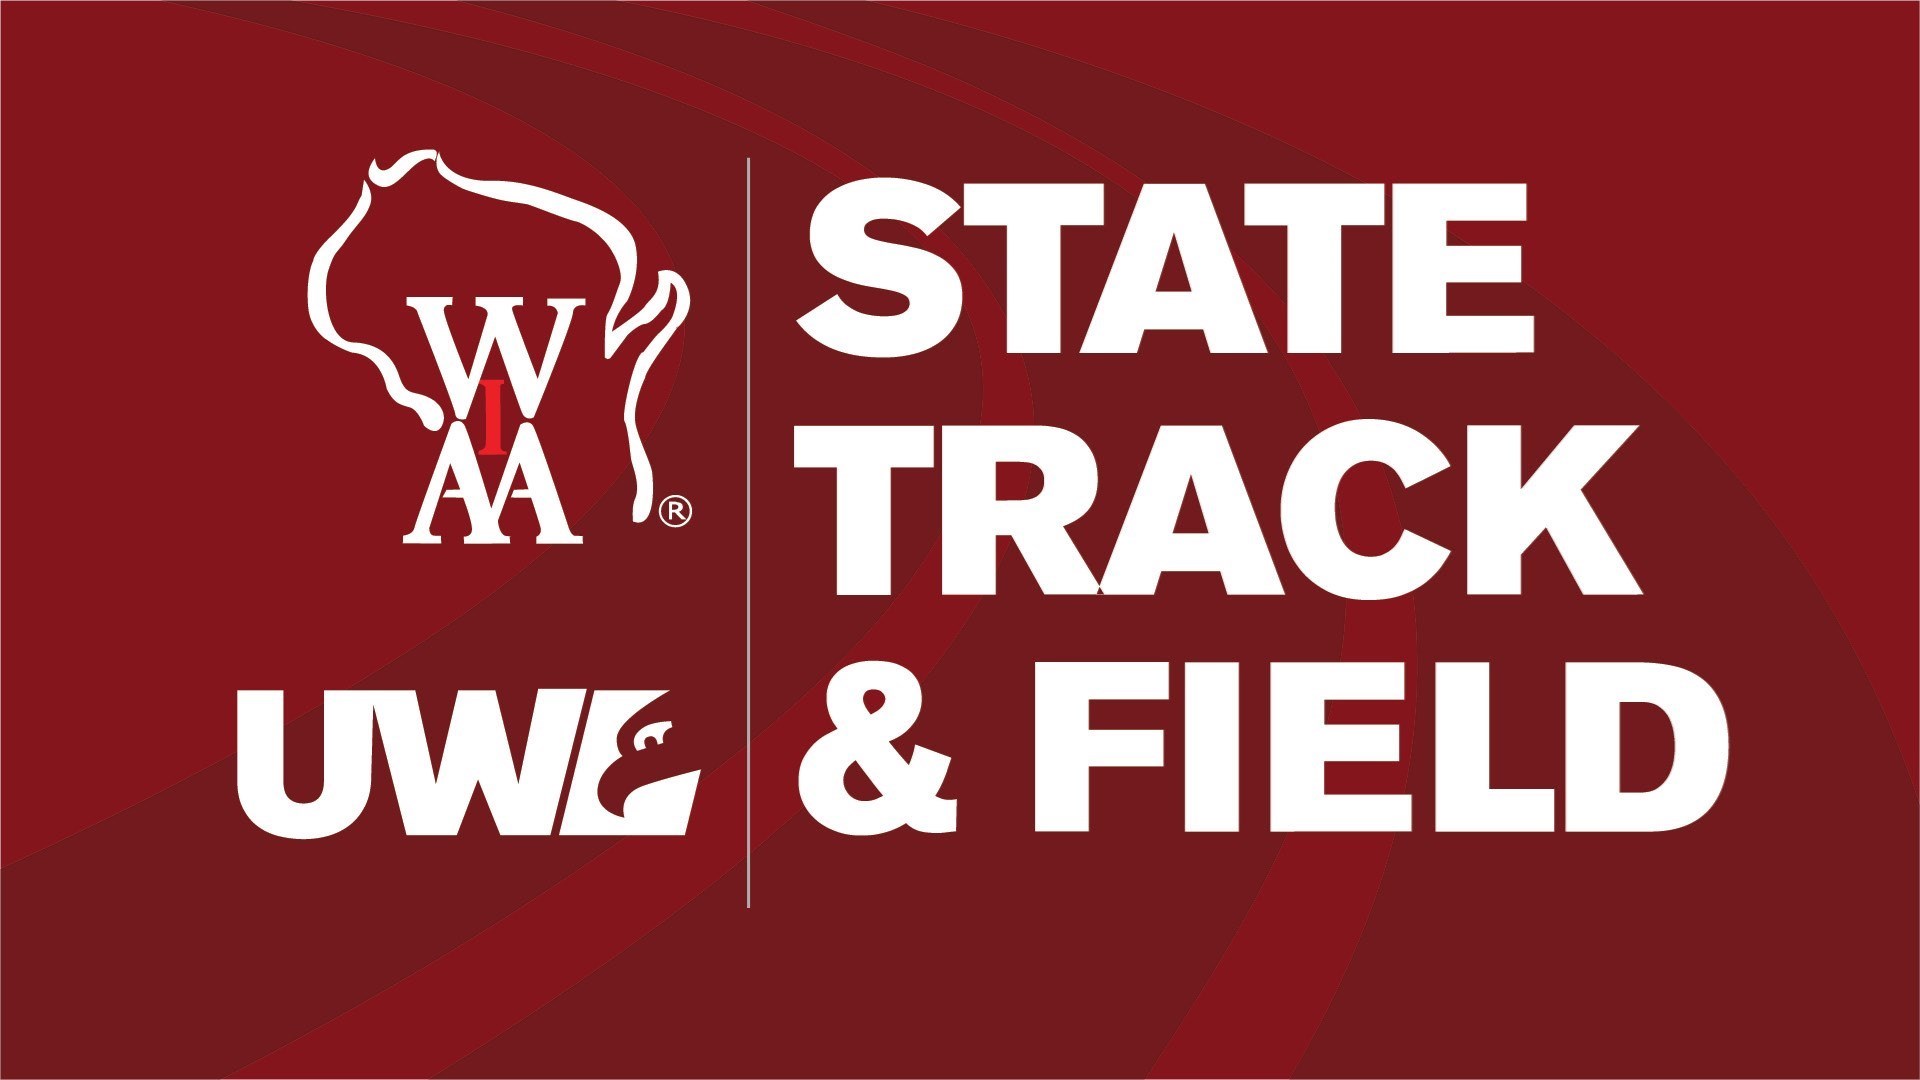 Event image for WIAA State Track Meet